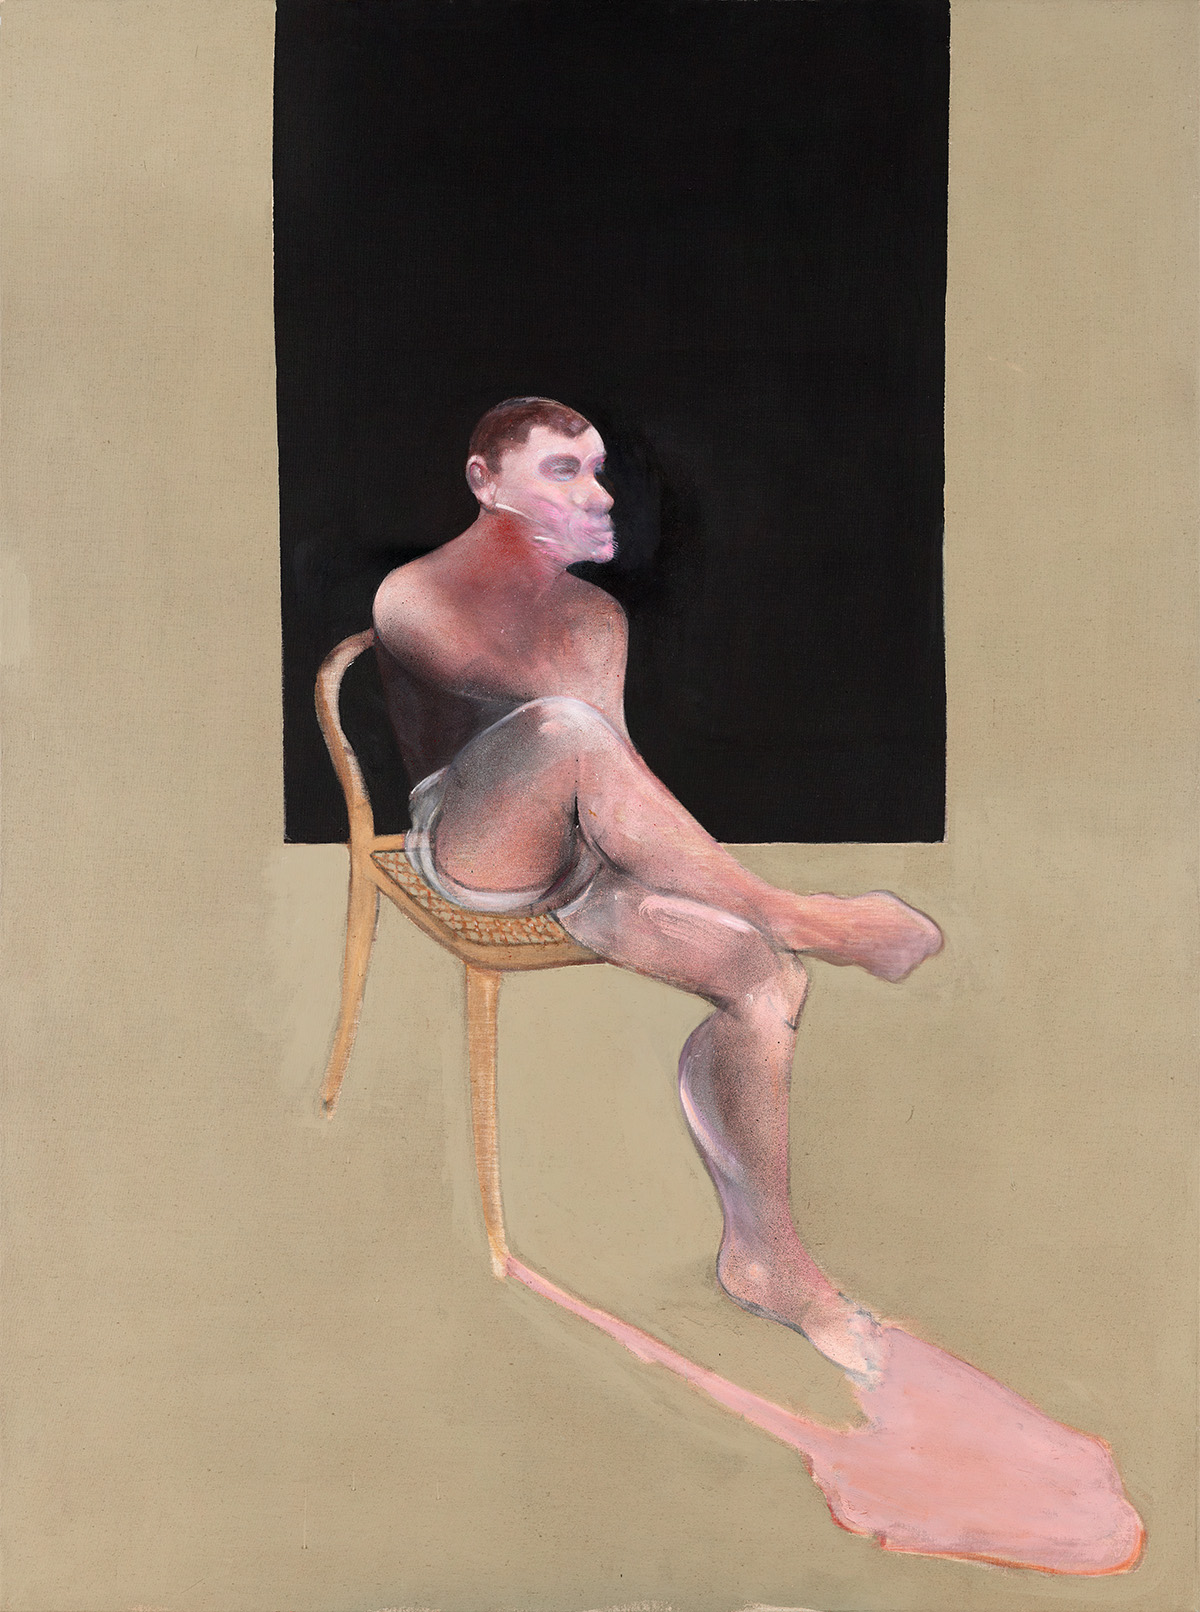 Francis Bacon, Portrait of John Edwards, 1988. Oil and aerosol paint on canvas. CR number 88-06. © The Estate of Francis Bacon / DACS London 2020. All rights reserved.